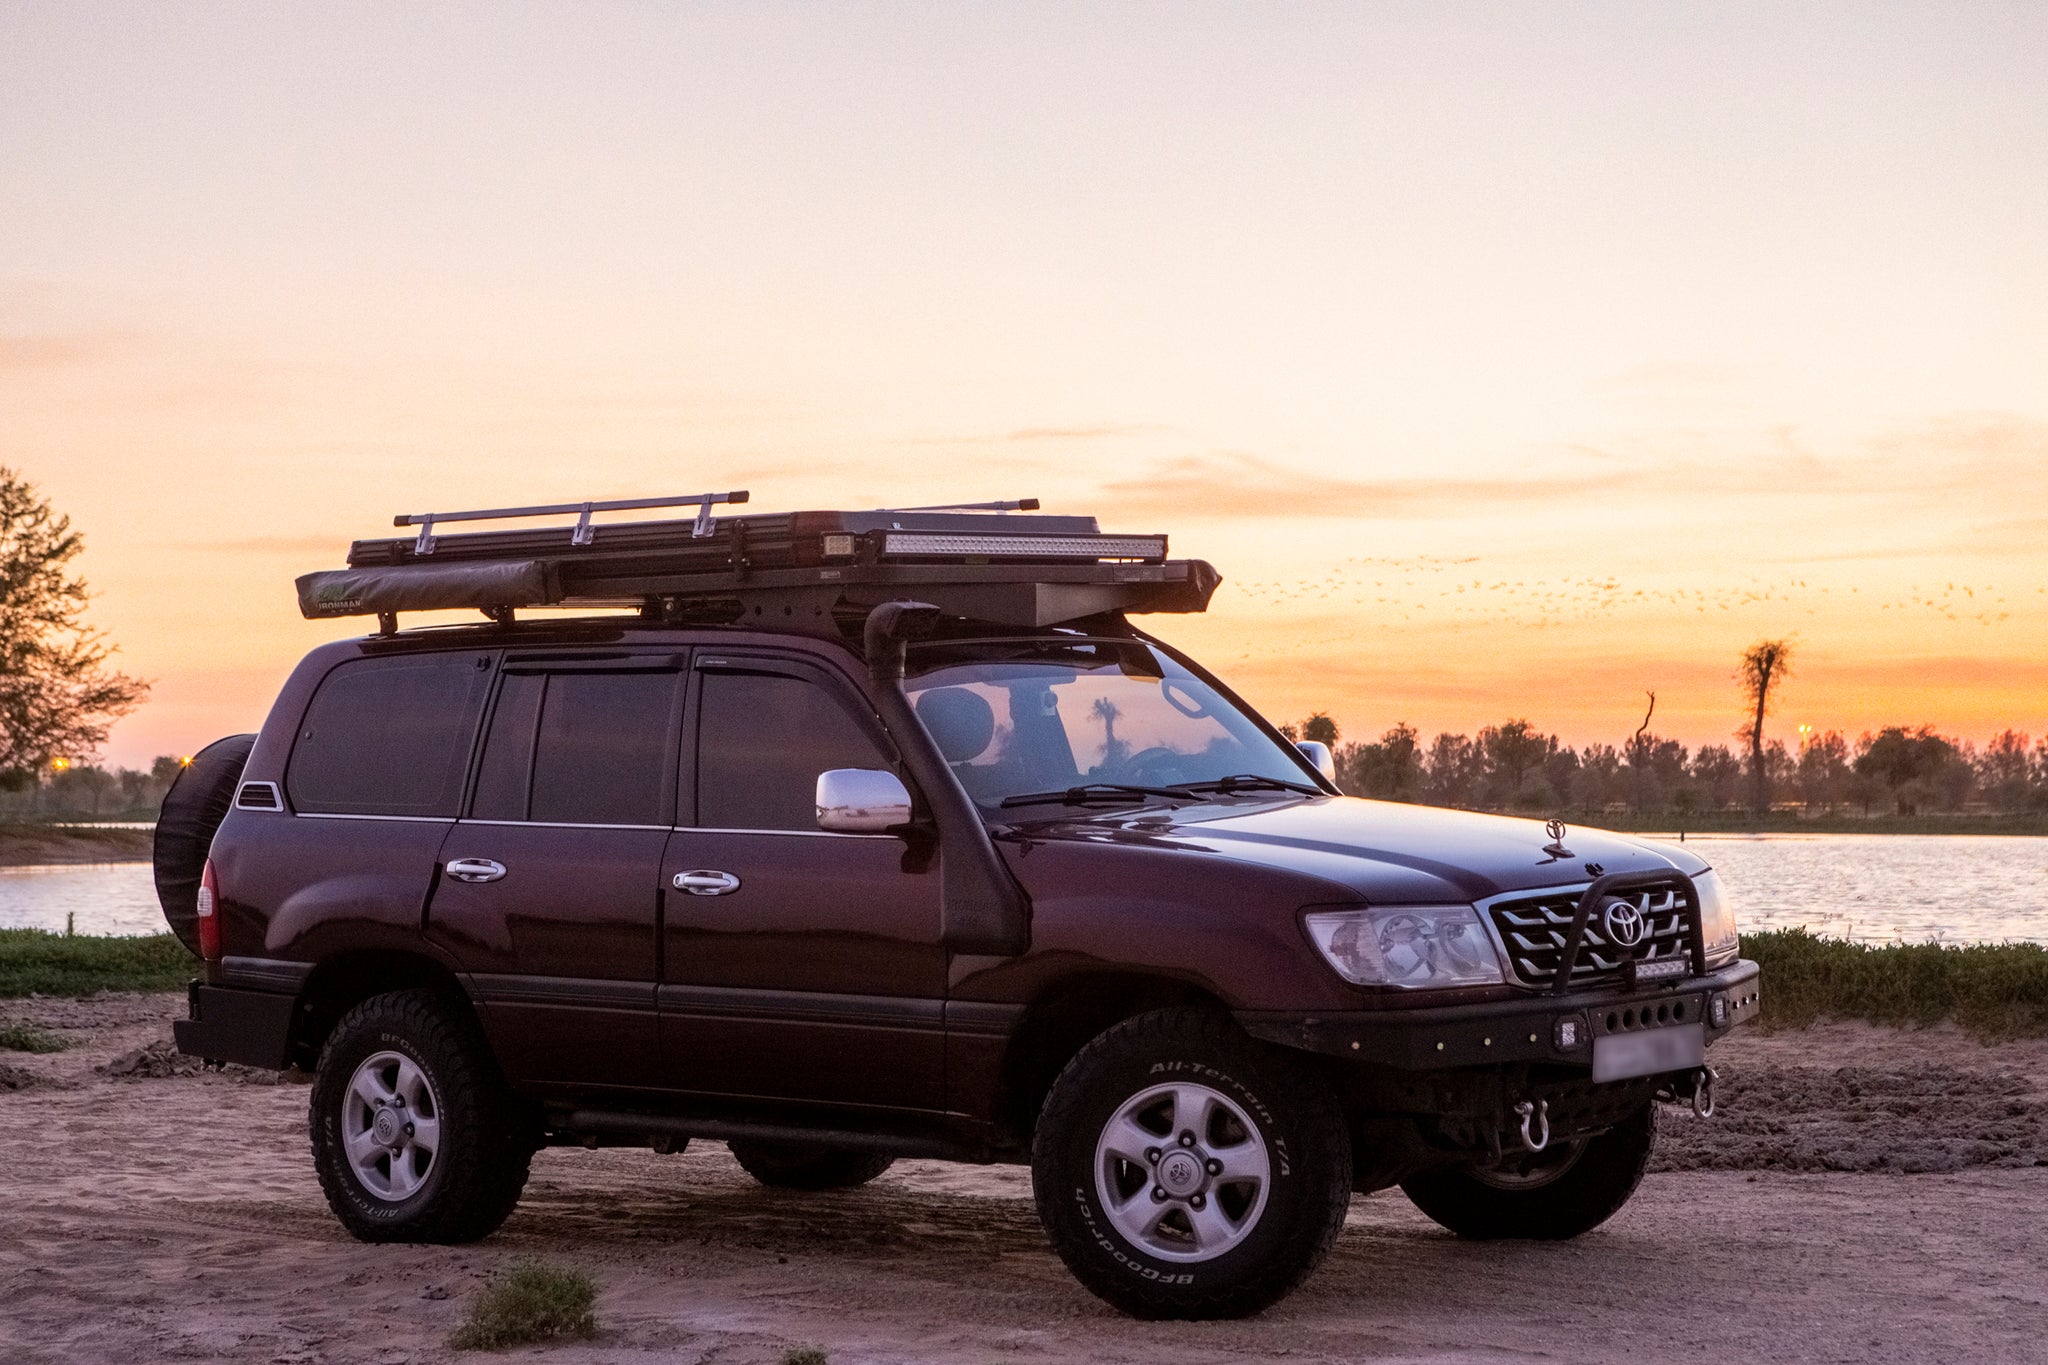 Origins and Evolution of Rooftop Tent - 02